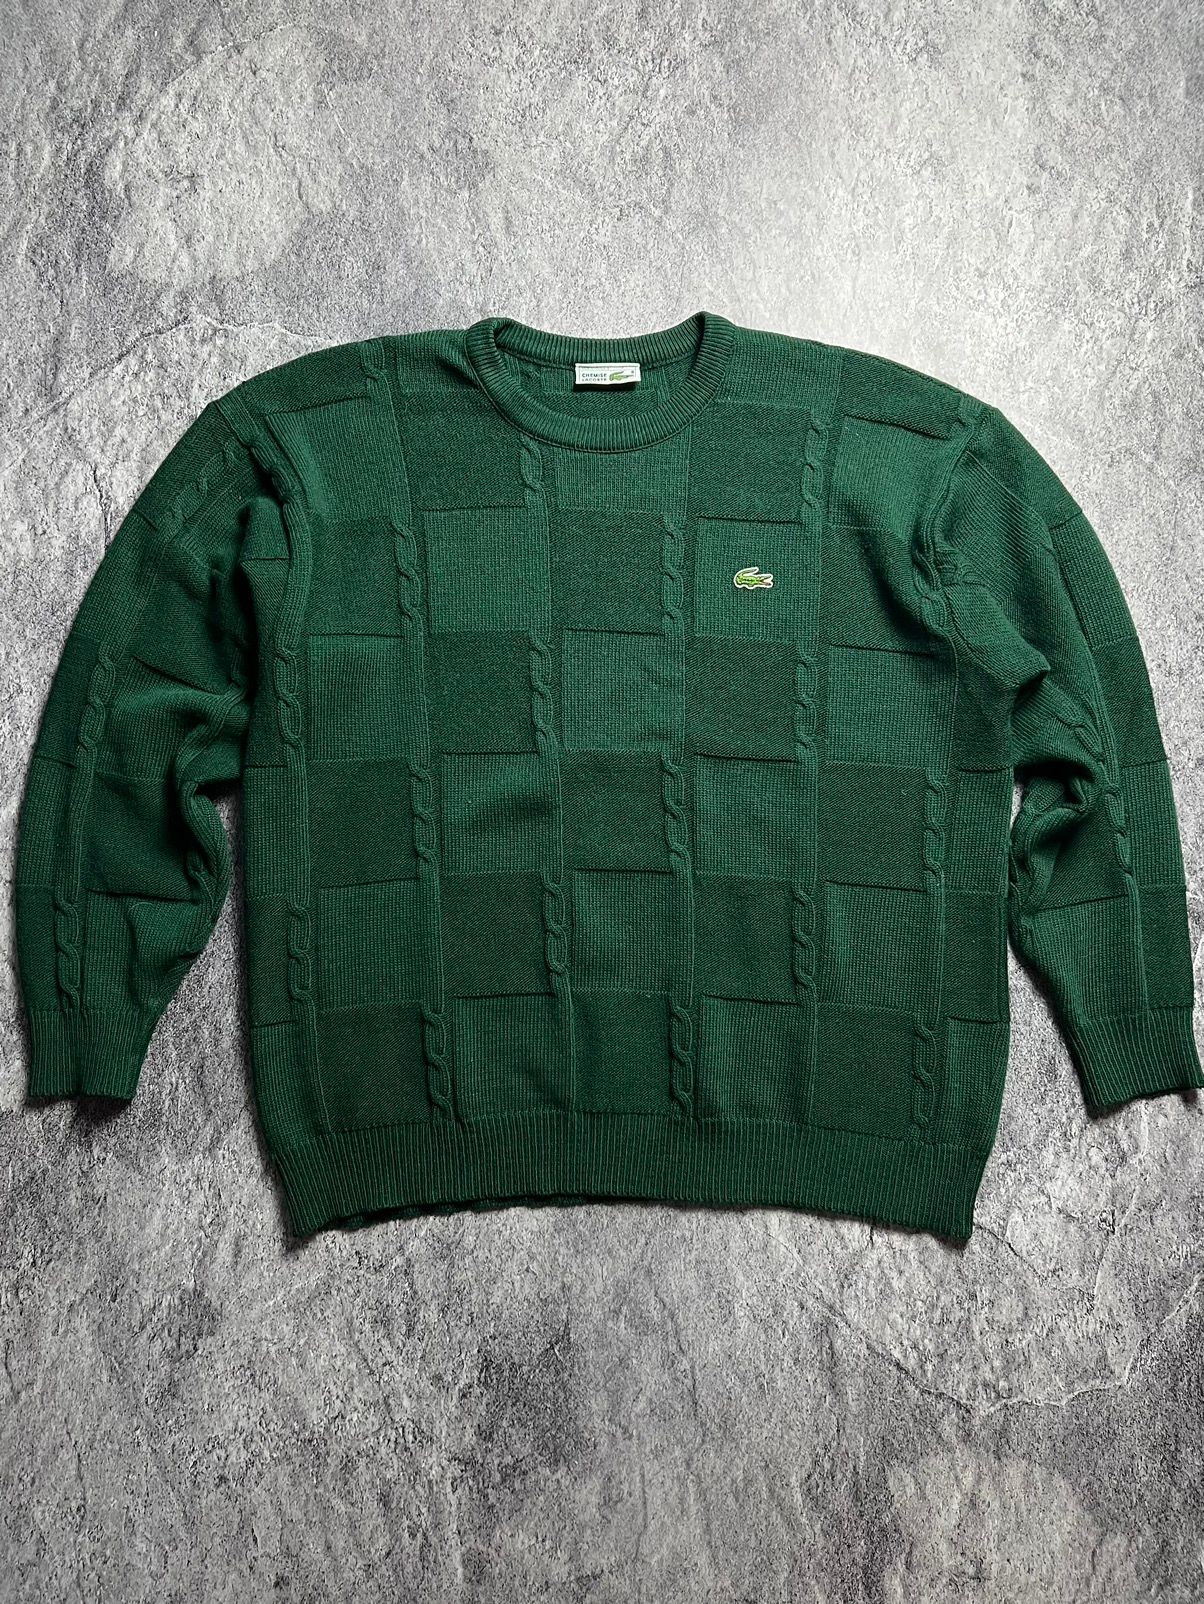 Pre-owned Lacoste X Vintage Lacoste Fisherman Japan Style Oversized Knit Sweater In Green